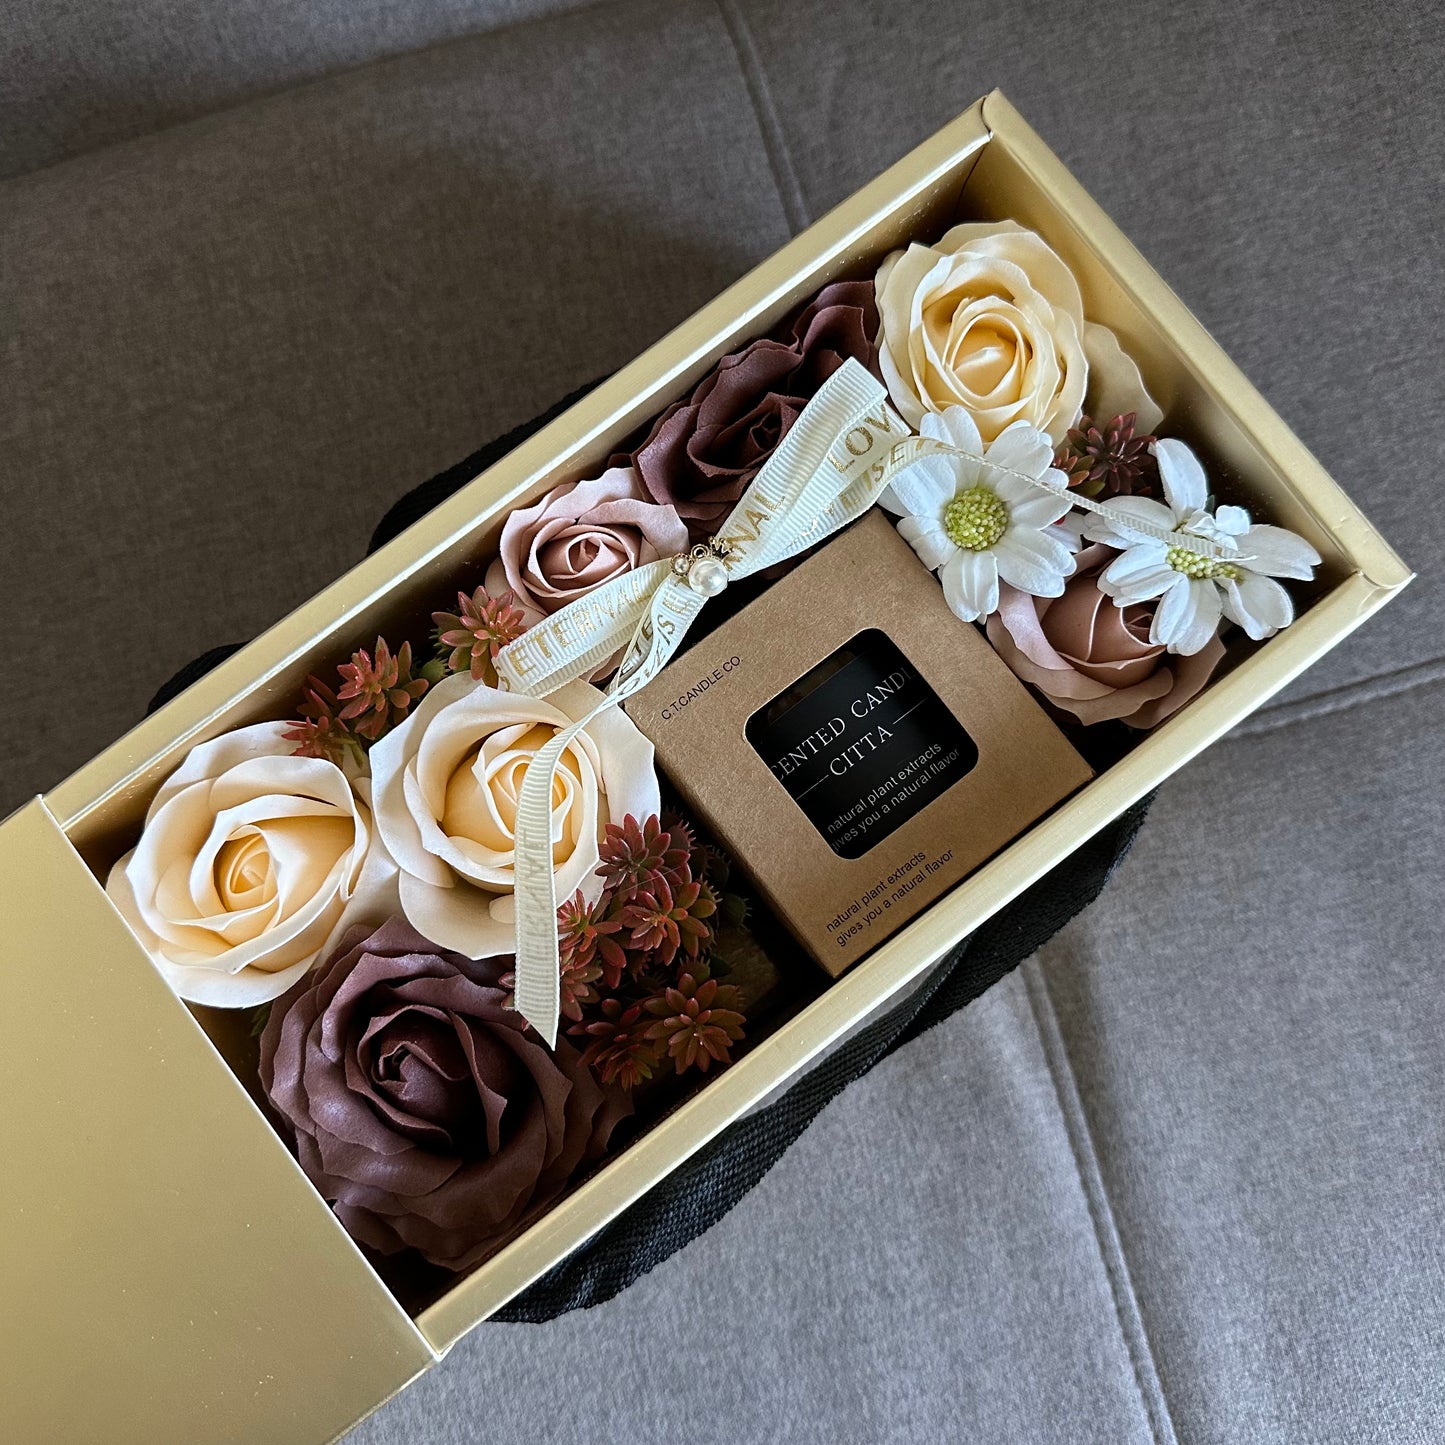 Flower Box with Scented Candles (最後1件)